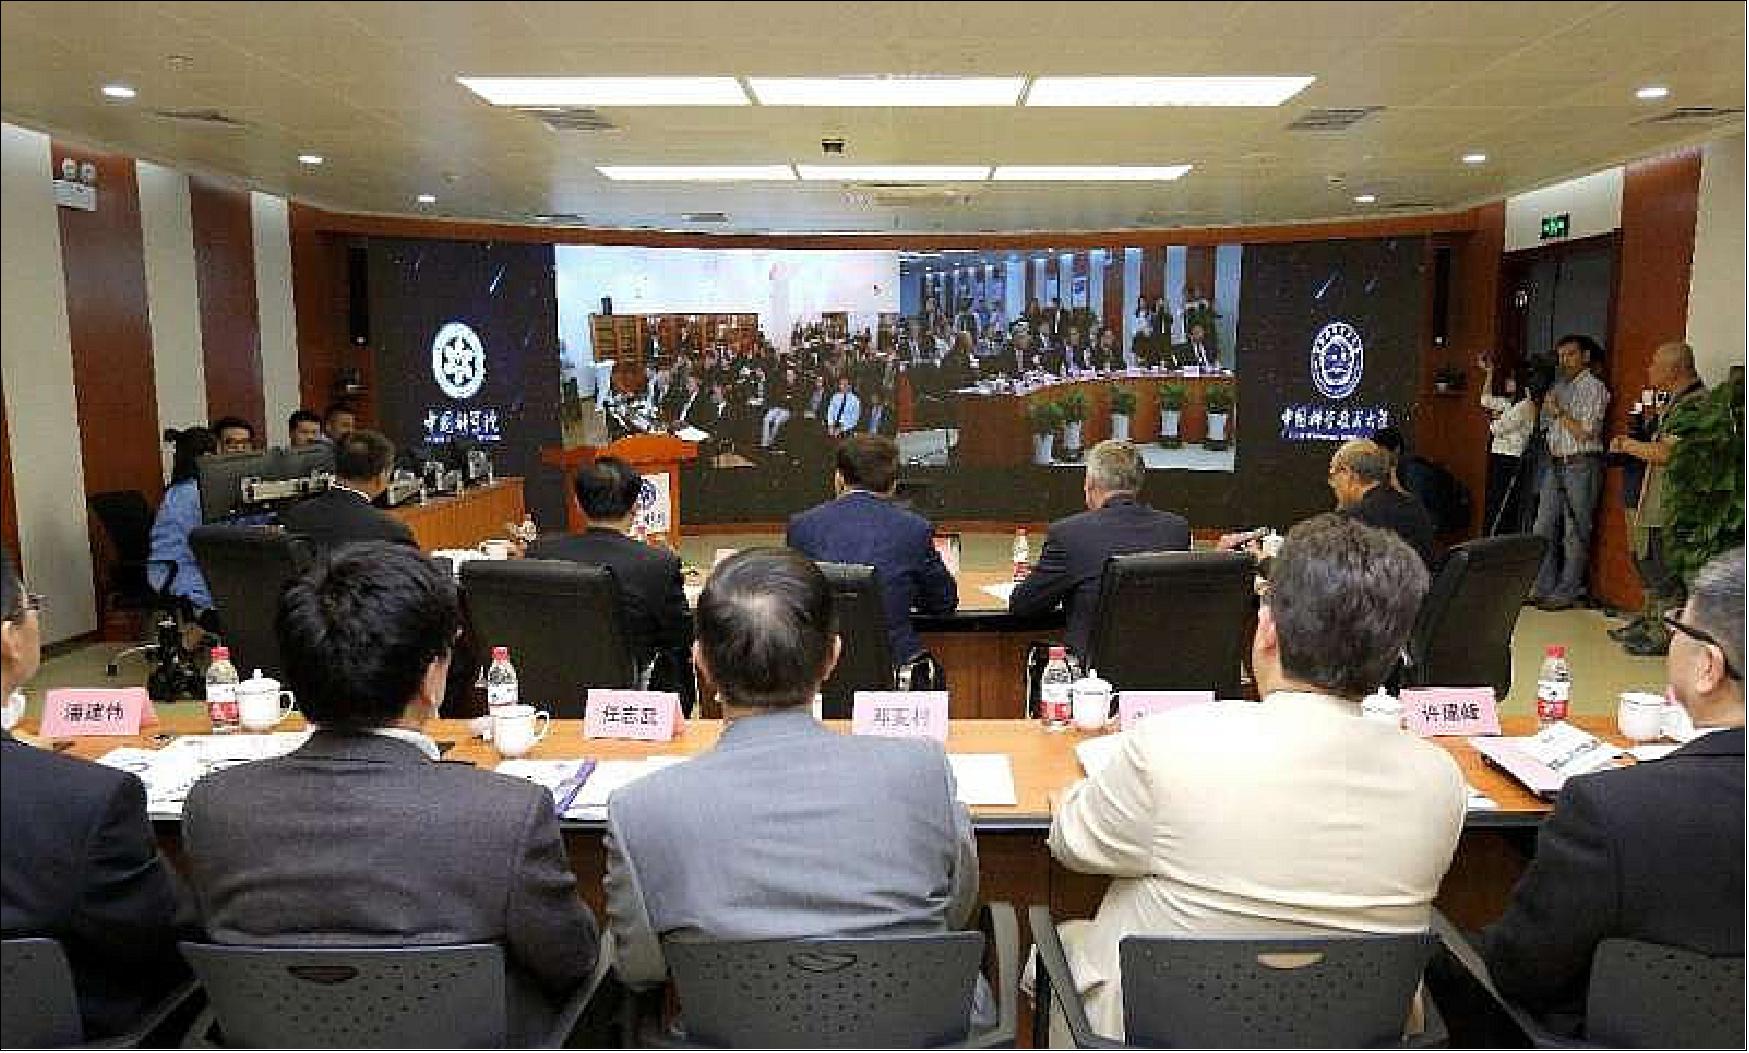 Figure 7: A photography of a quantum-secure intercontinental video conference held between Chinese Academy of Sciences and Austrian Academy of Sciences on 29 September 2017, providing a real-world demonstration of quantum communication (image credit: Chinese Academy of Sciences)